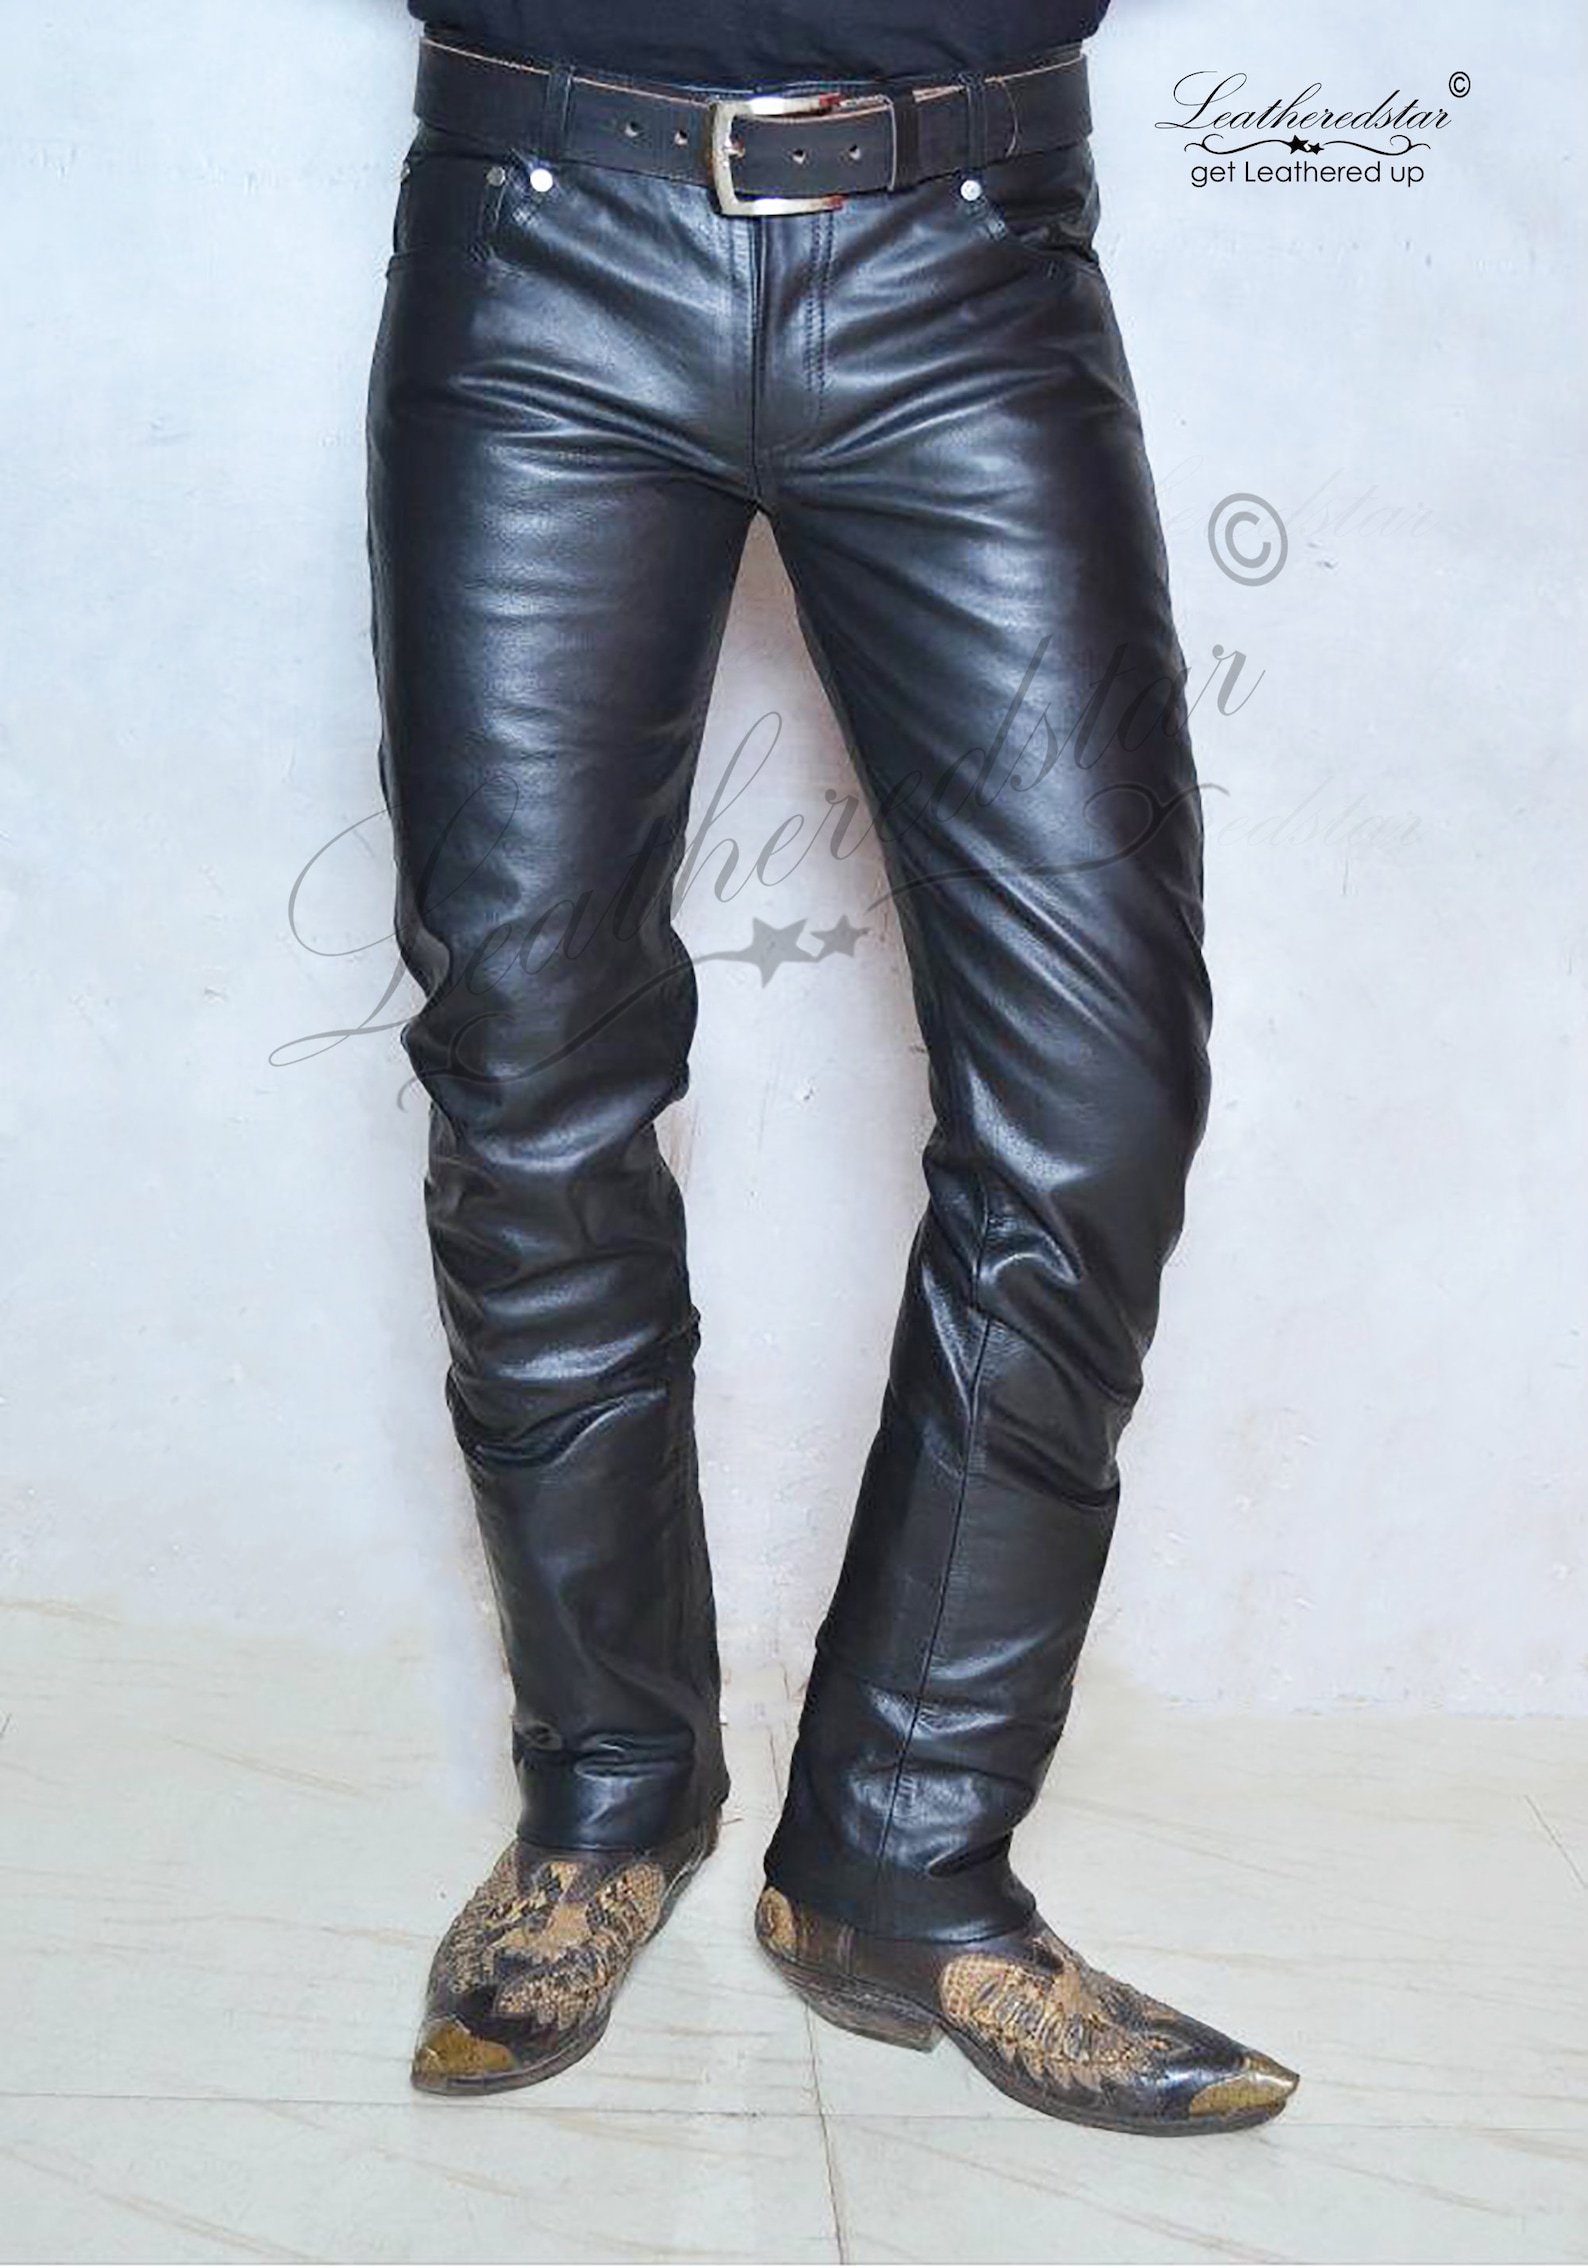 Black Leather Slimfit Leather Jeans Pant 501 Style Fits Over - Etsy